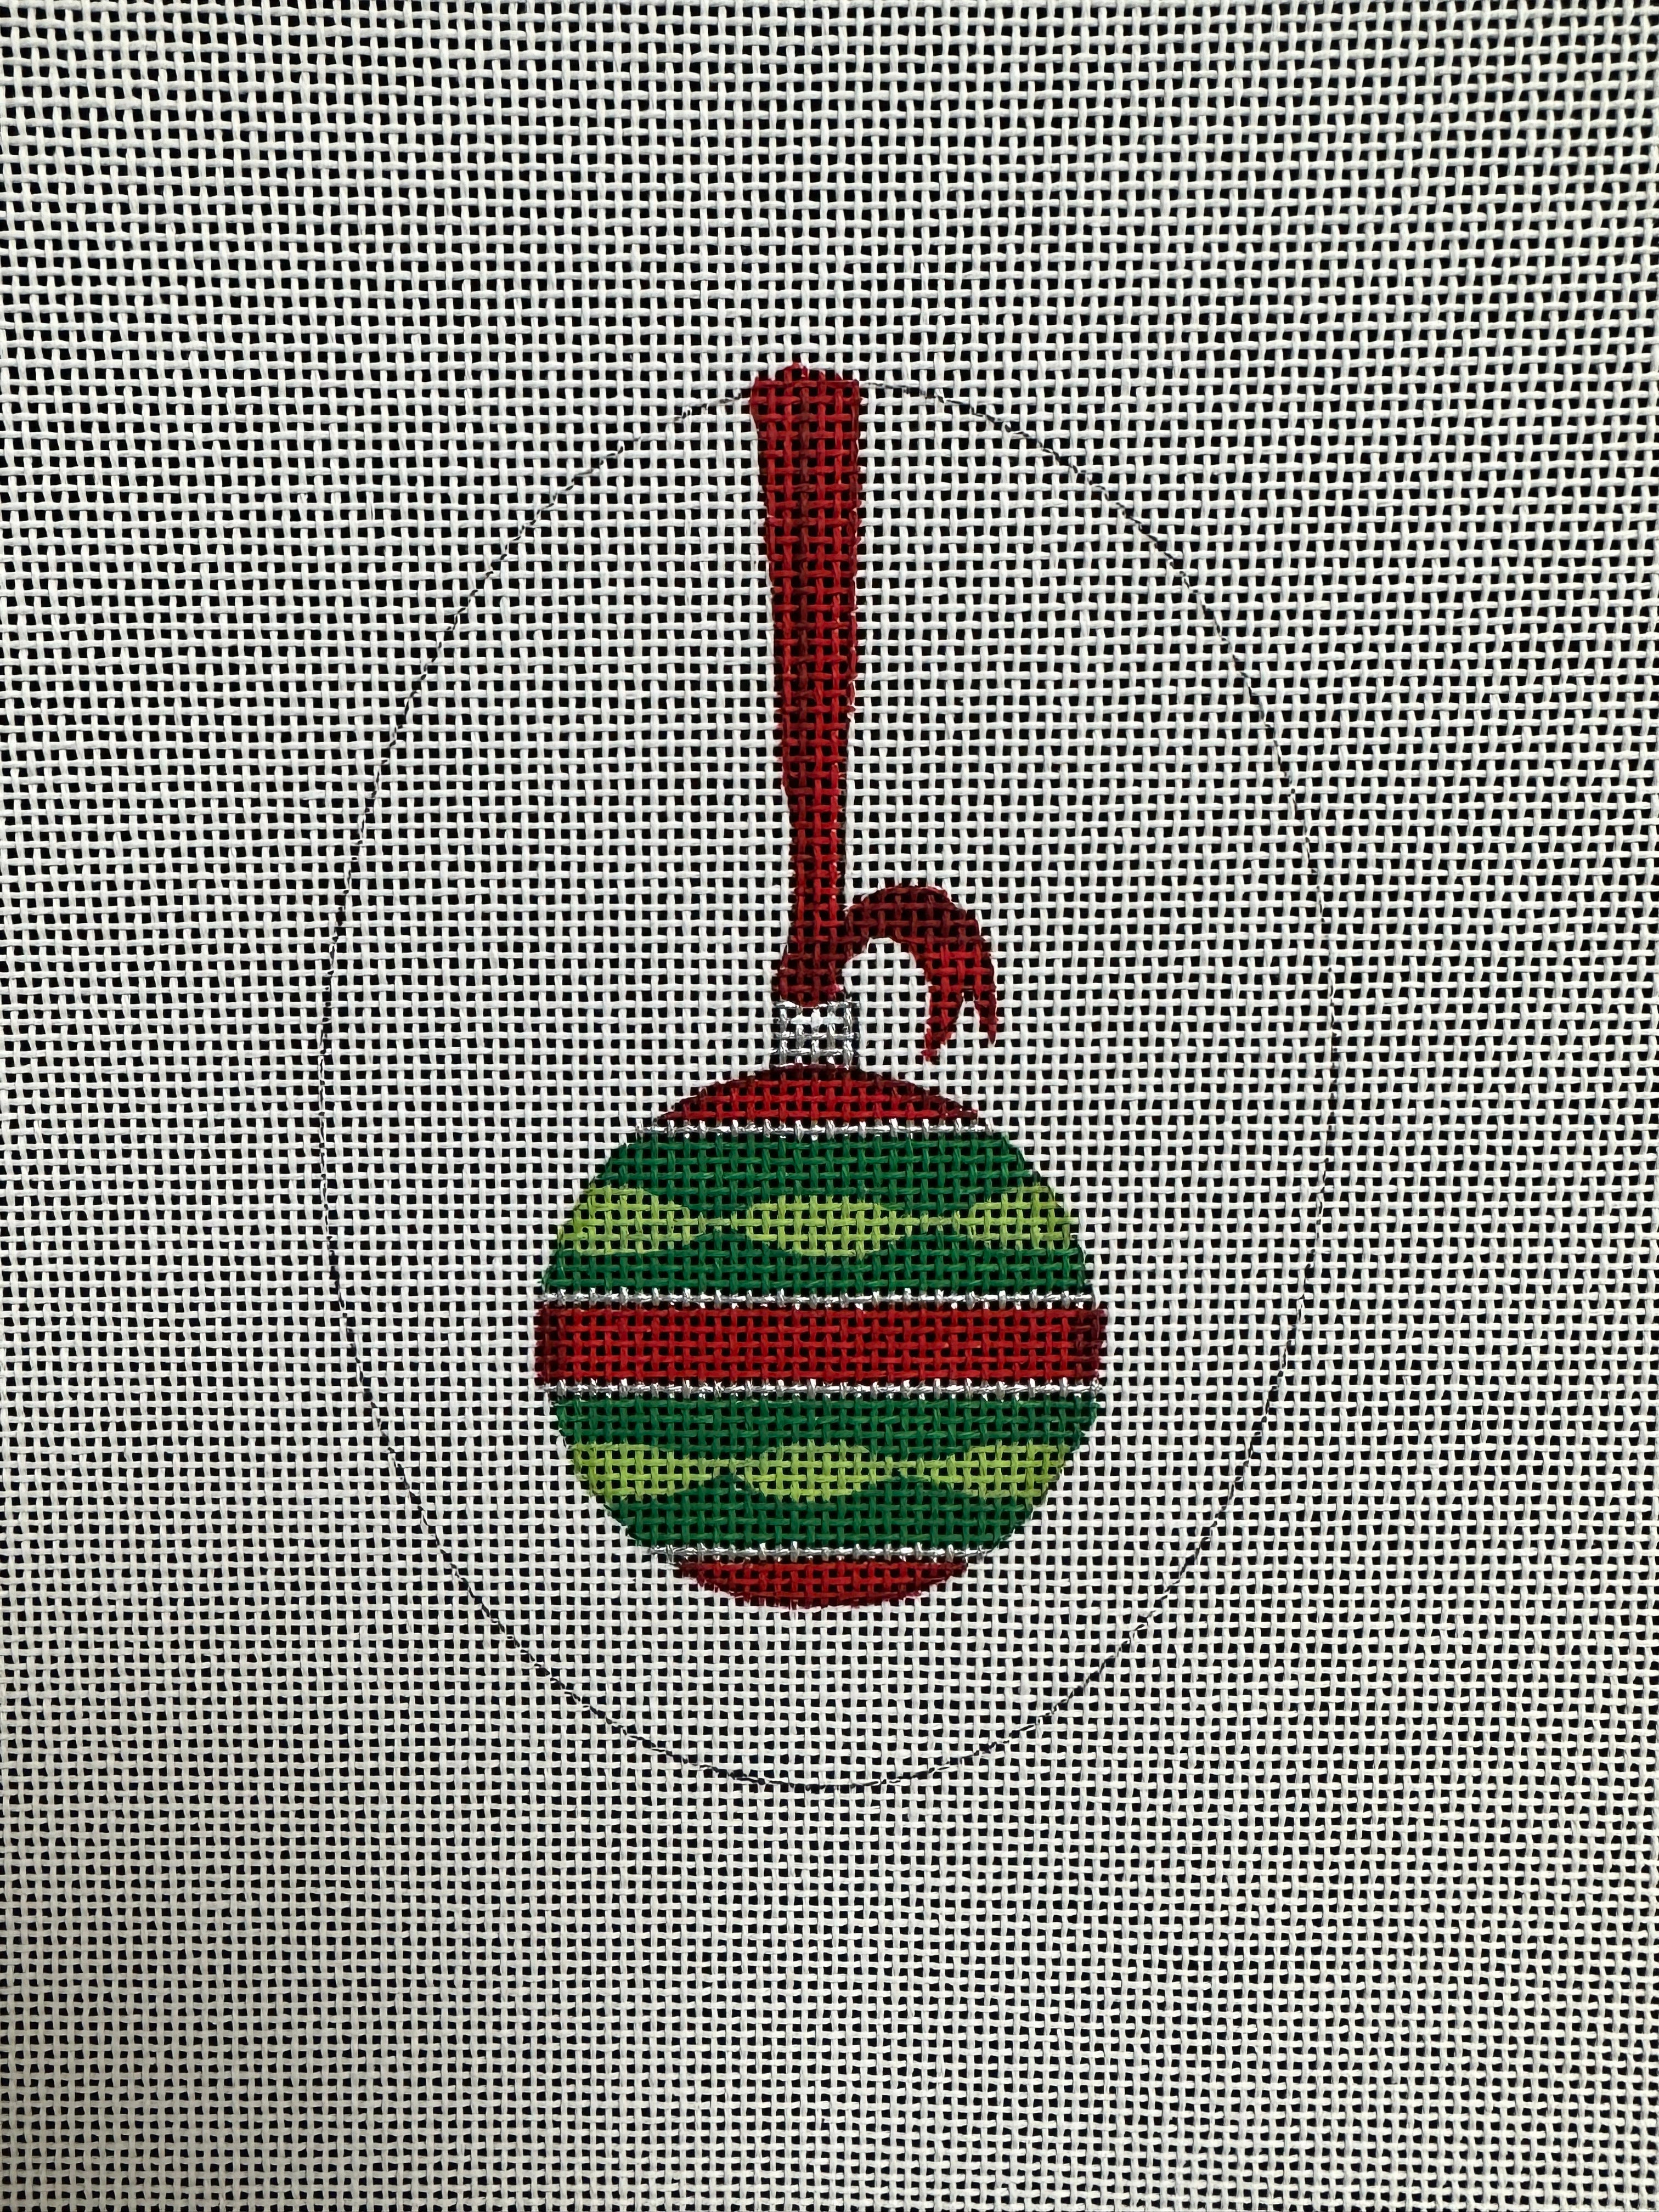 Christmas Ball Ornament Oval - The Flying Needles